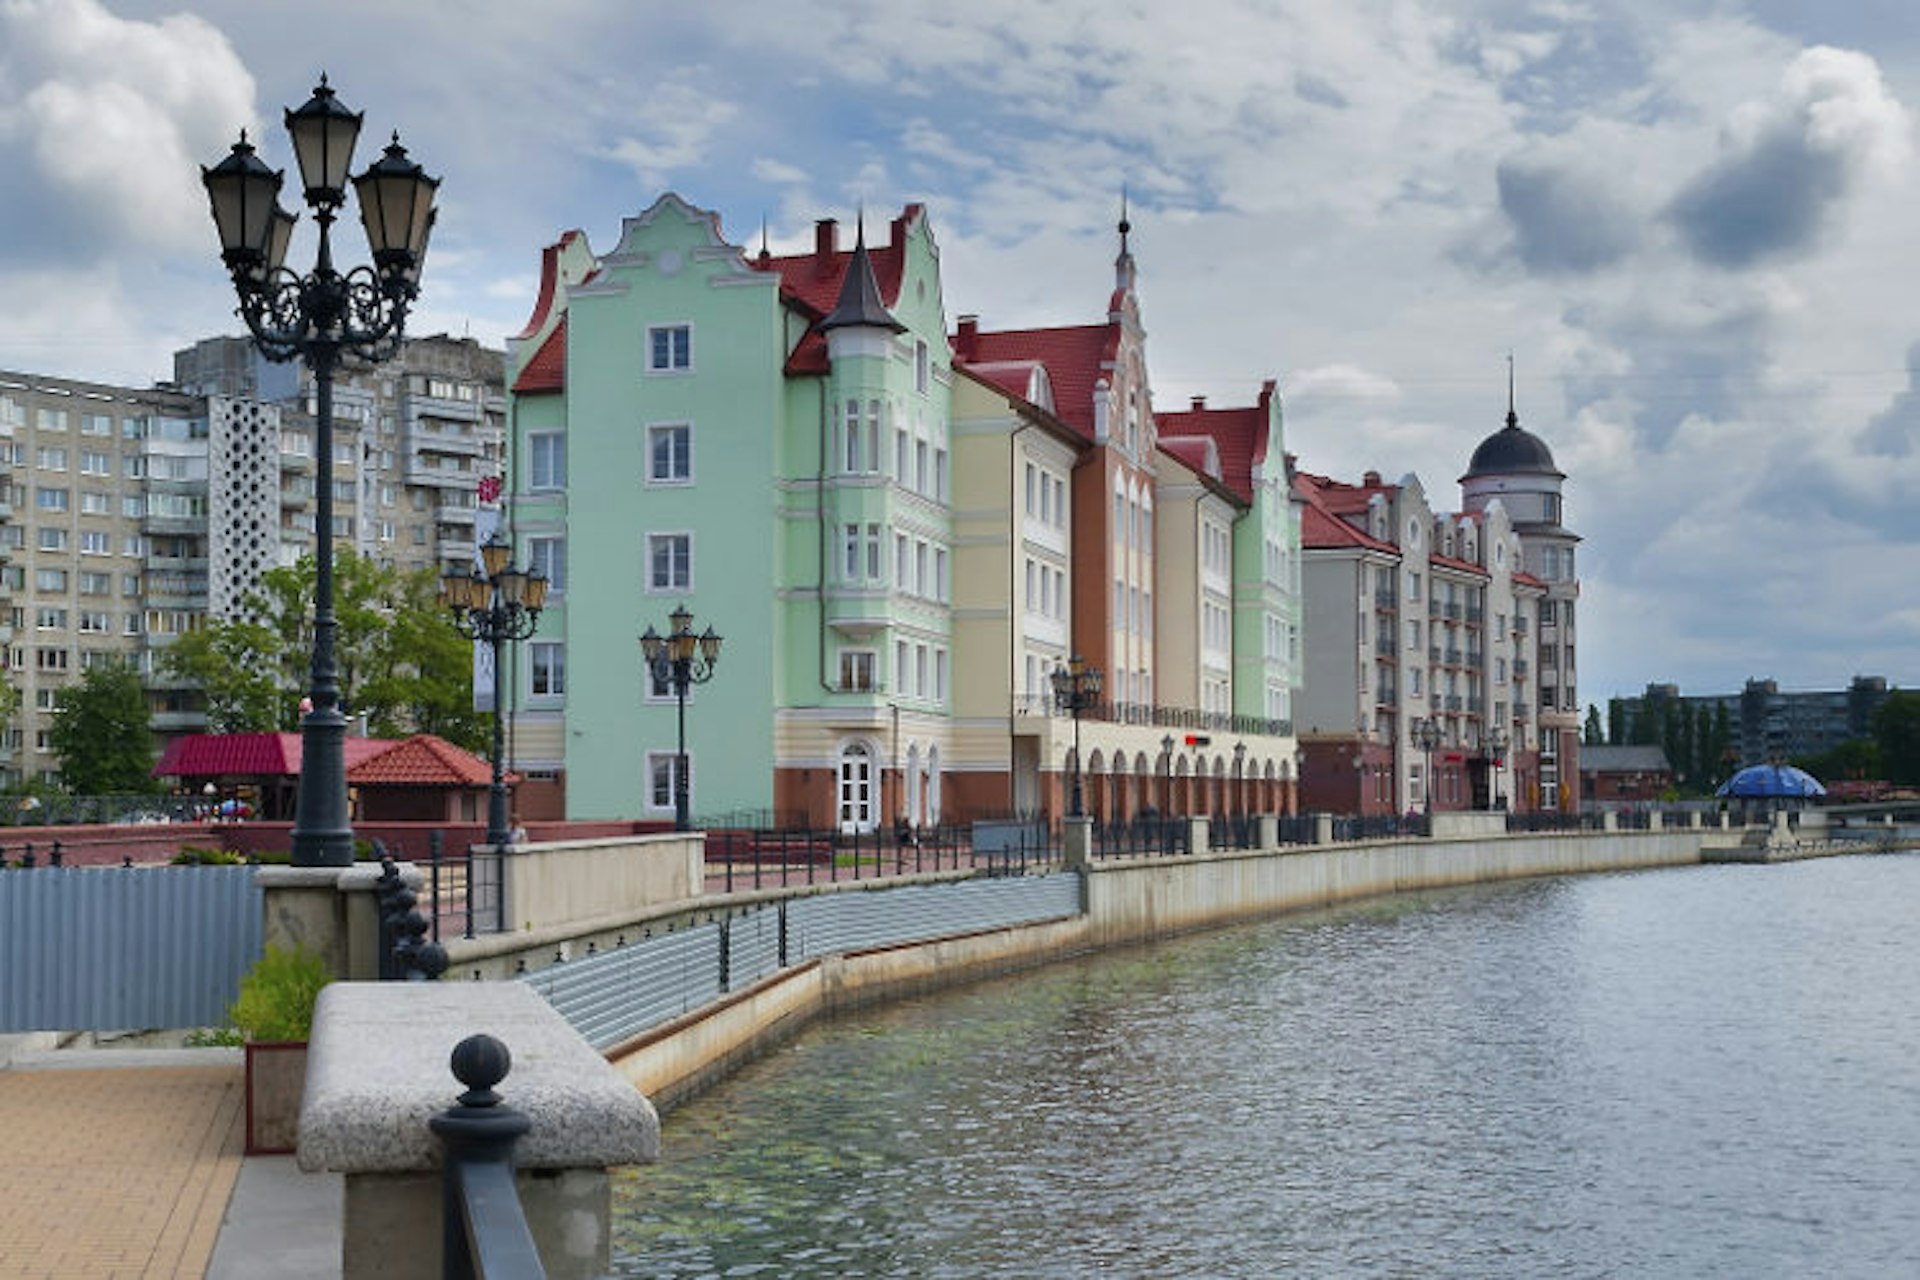 Quayside buildings in Kaliningrad’s Fish Village. Image by Sergei Butorin / iStock / Getty Images